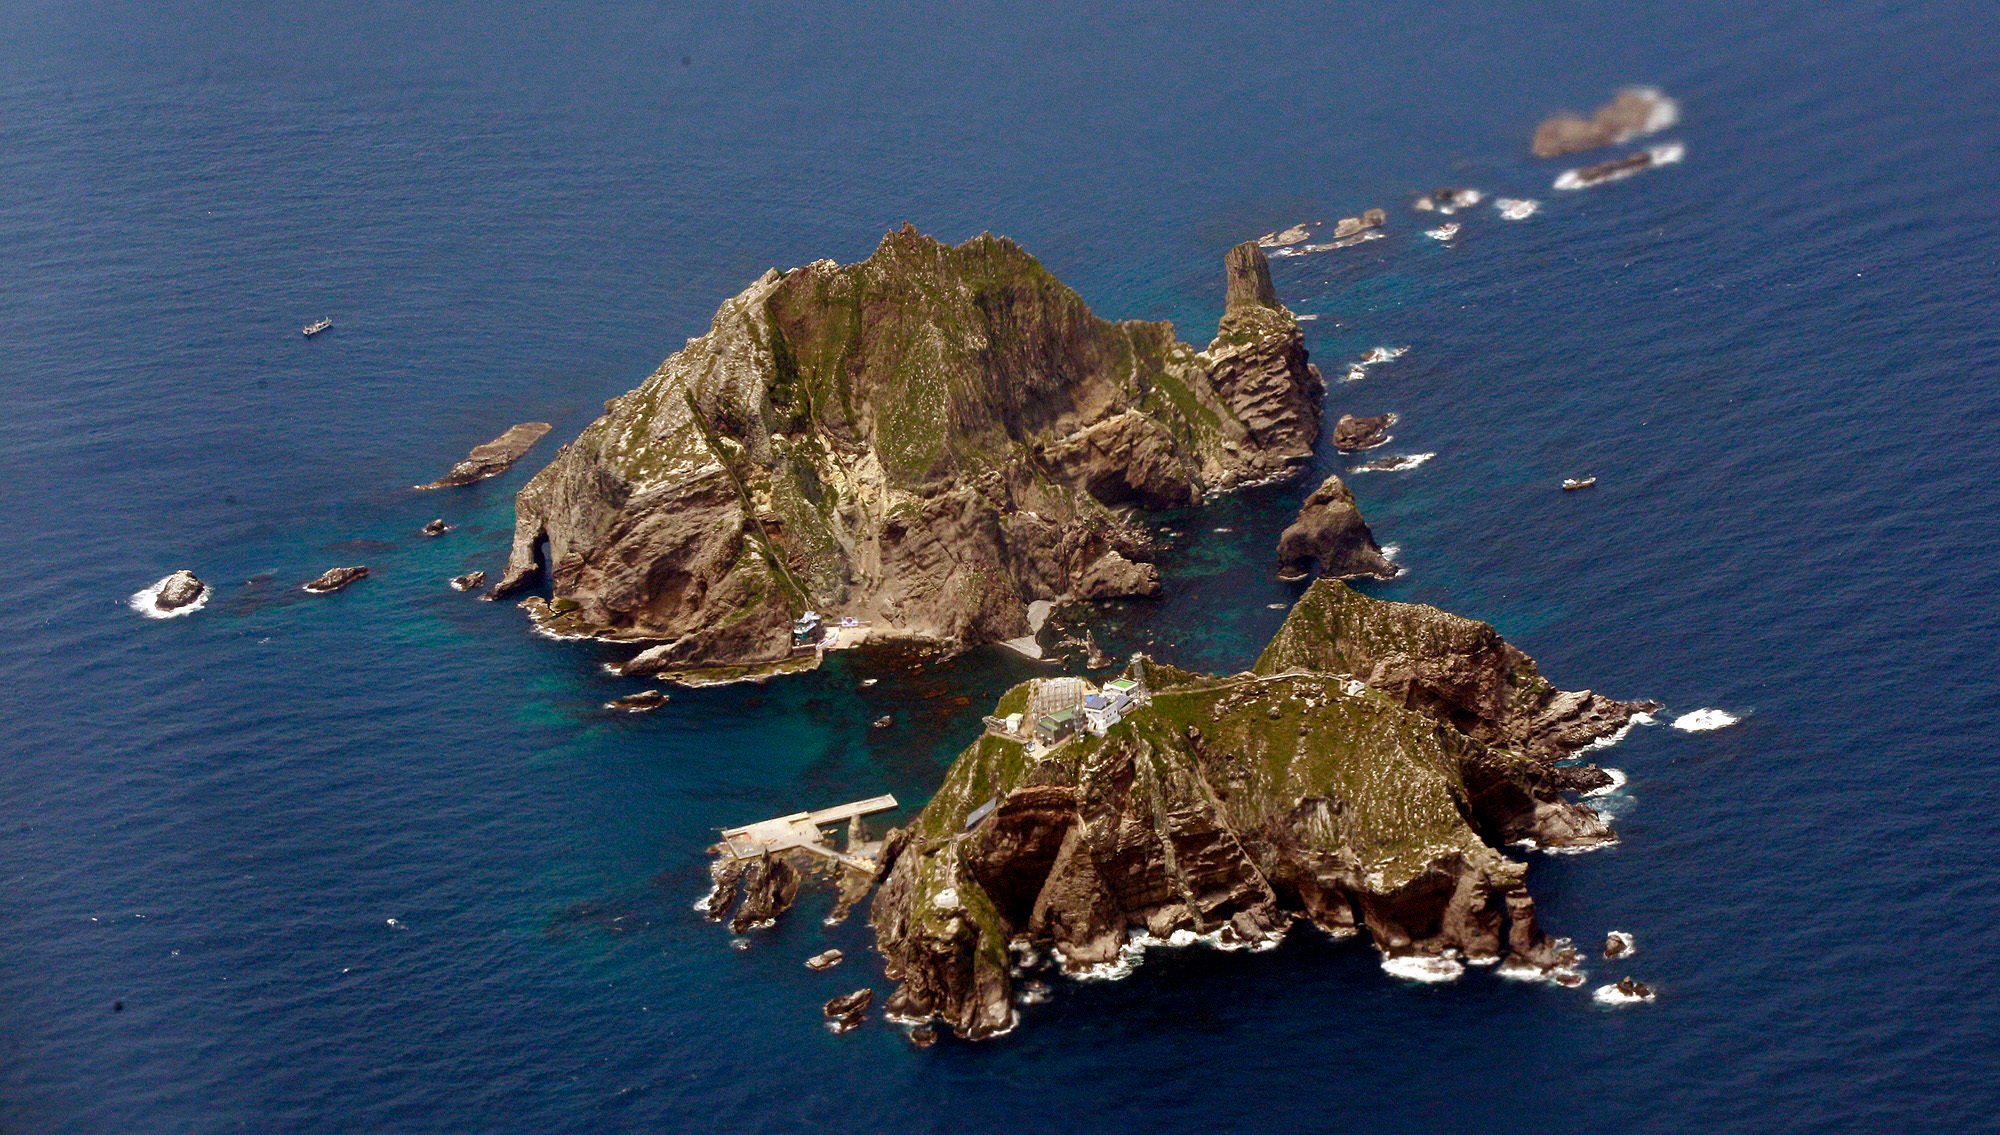 Seoul’s official stance remains that Dokdo, which Japan claims as the Takeshima islands, is the “inherent territory” of South Korea. Photo: AP